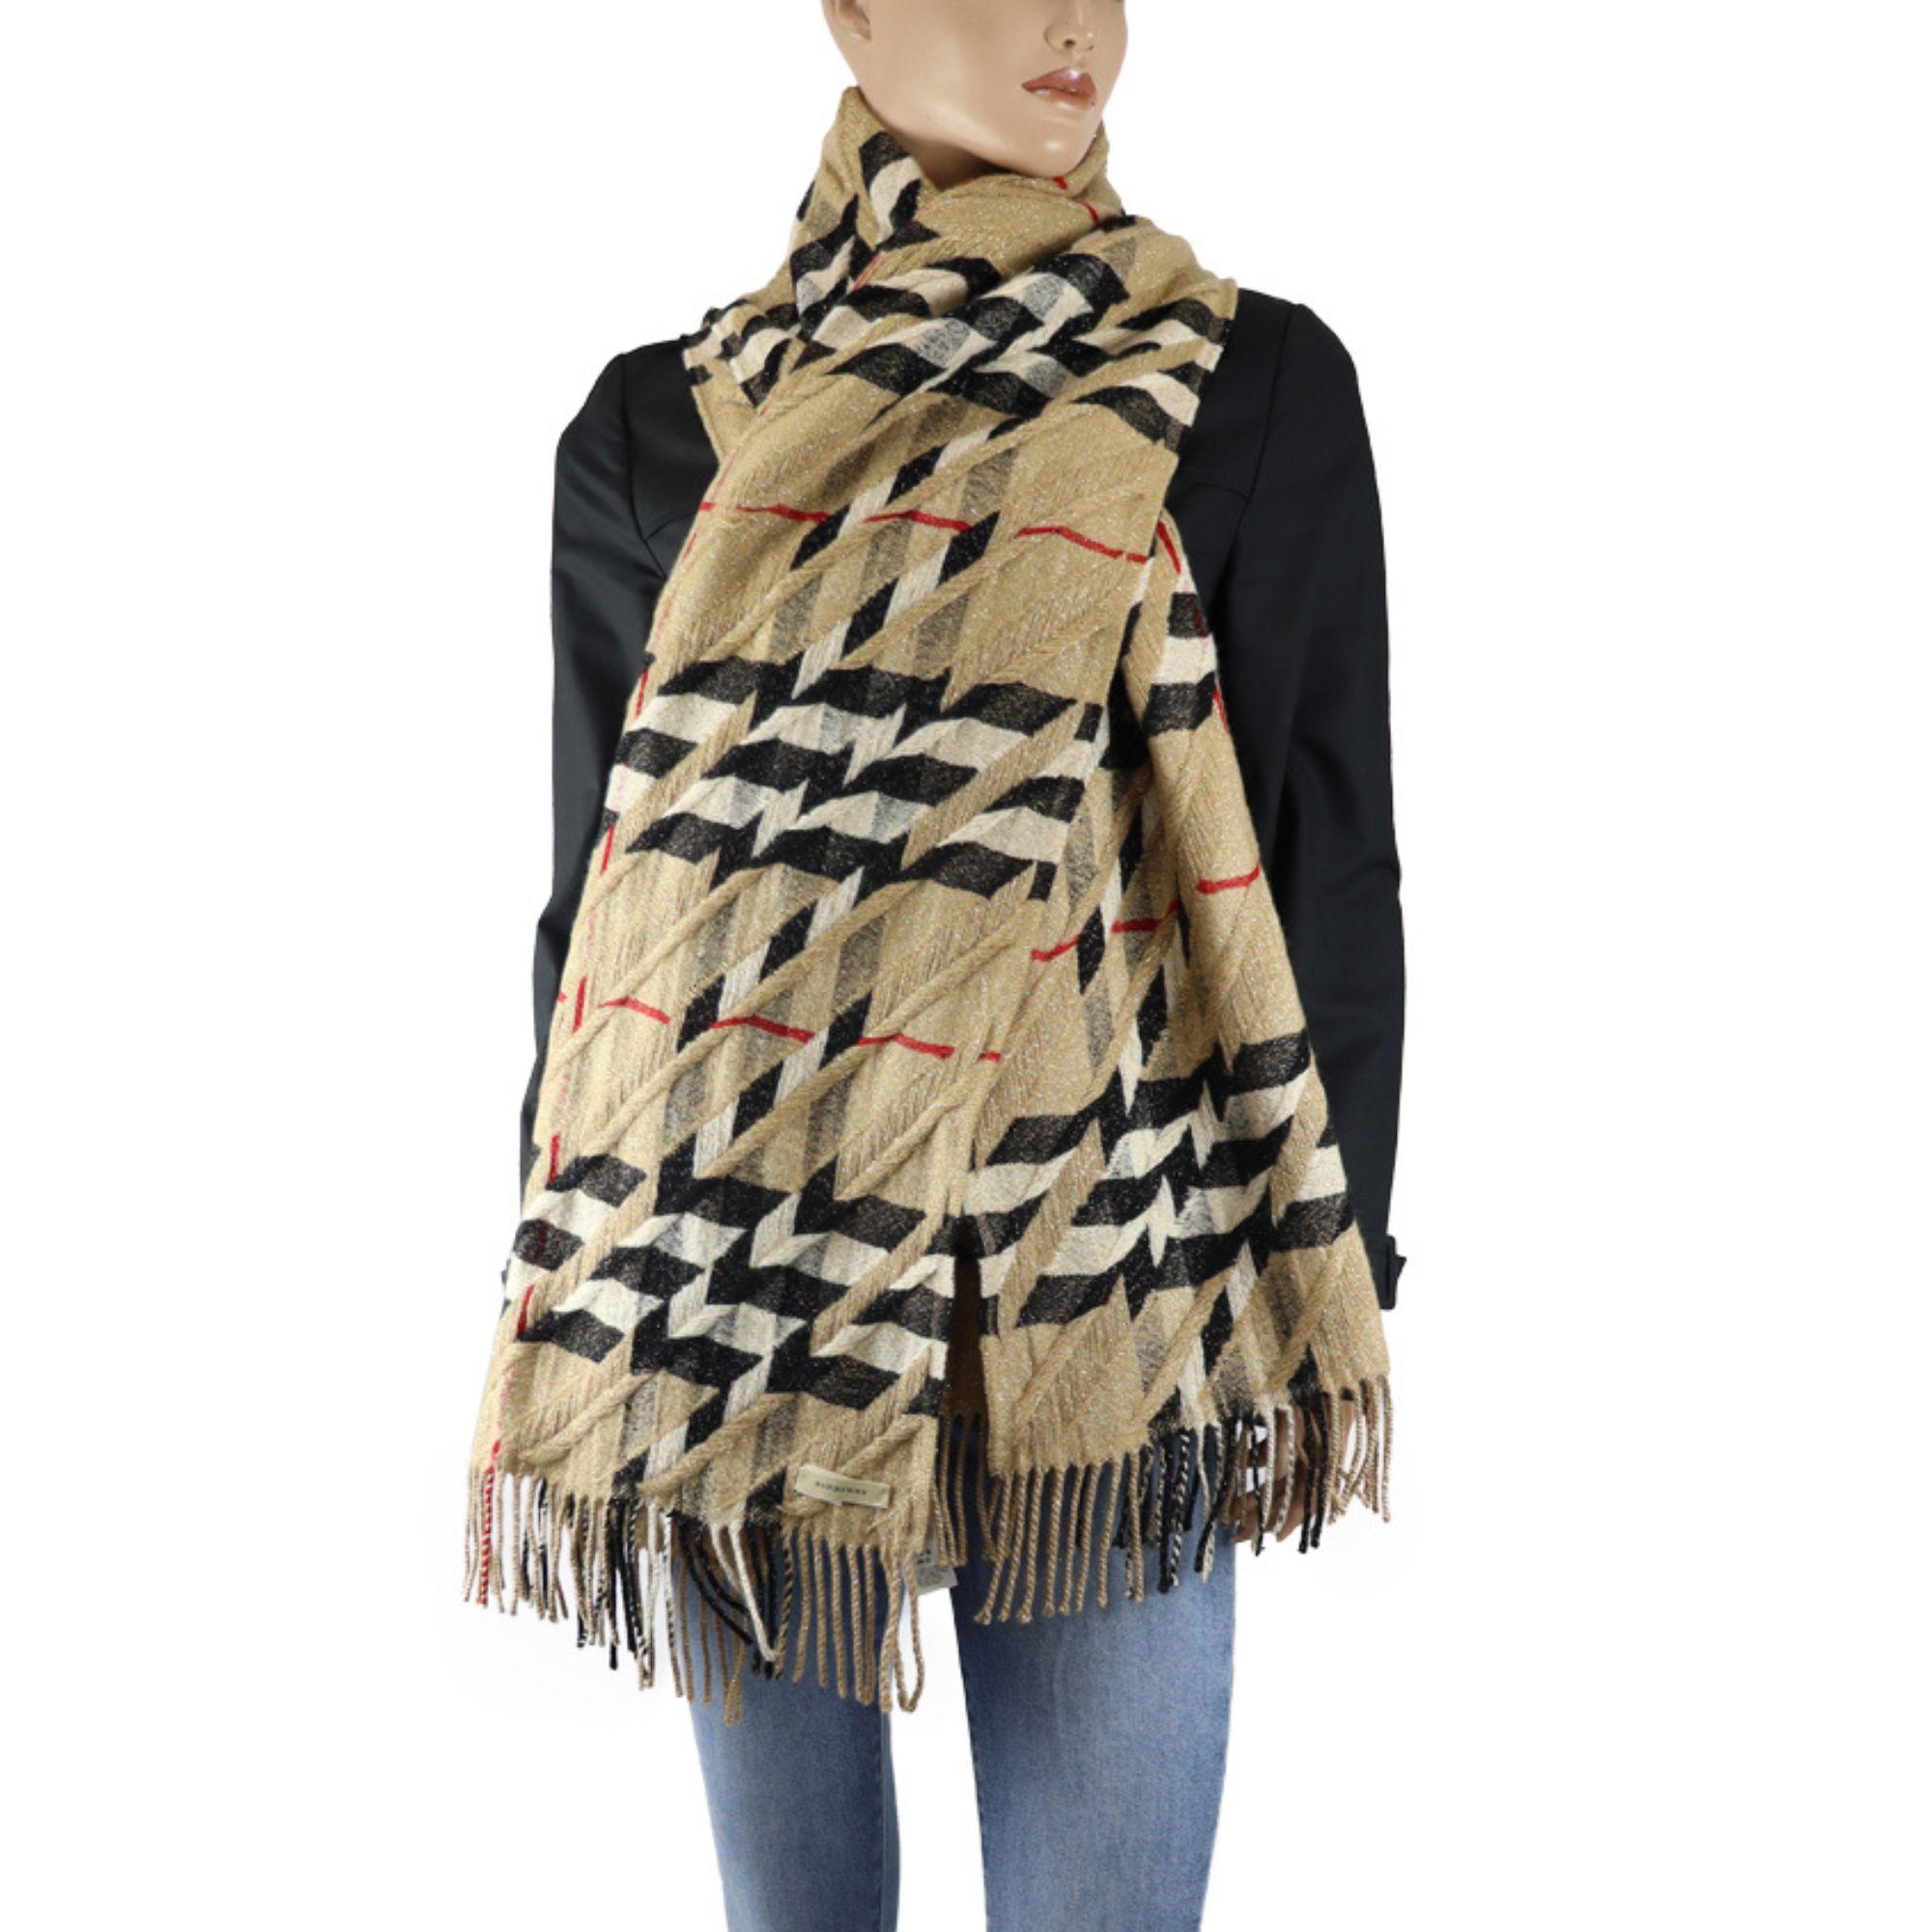 Burberry cashmere haymarket check with shimmery tinsel throughout. Featuring fringe details on the ends.
Measurements: 88cmx88cm
Overall Condition: Very good